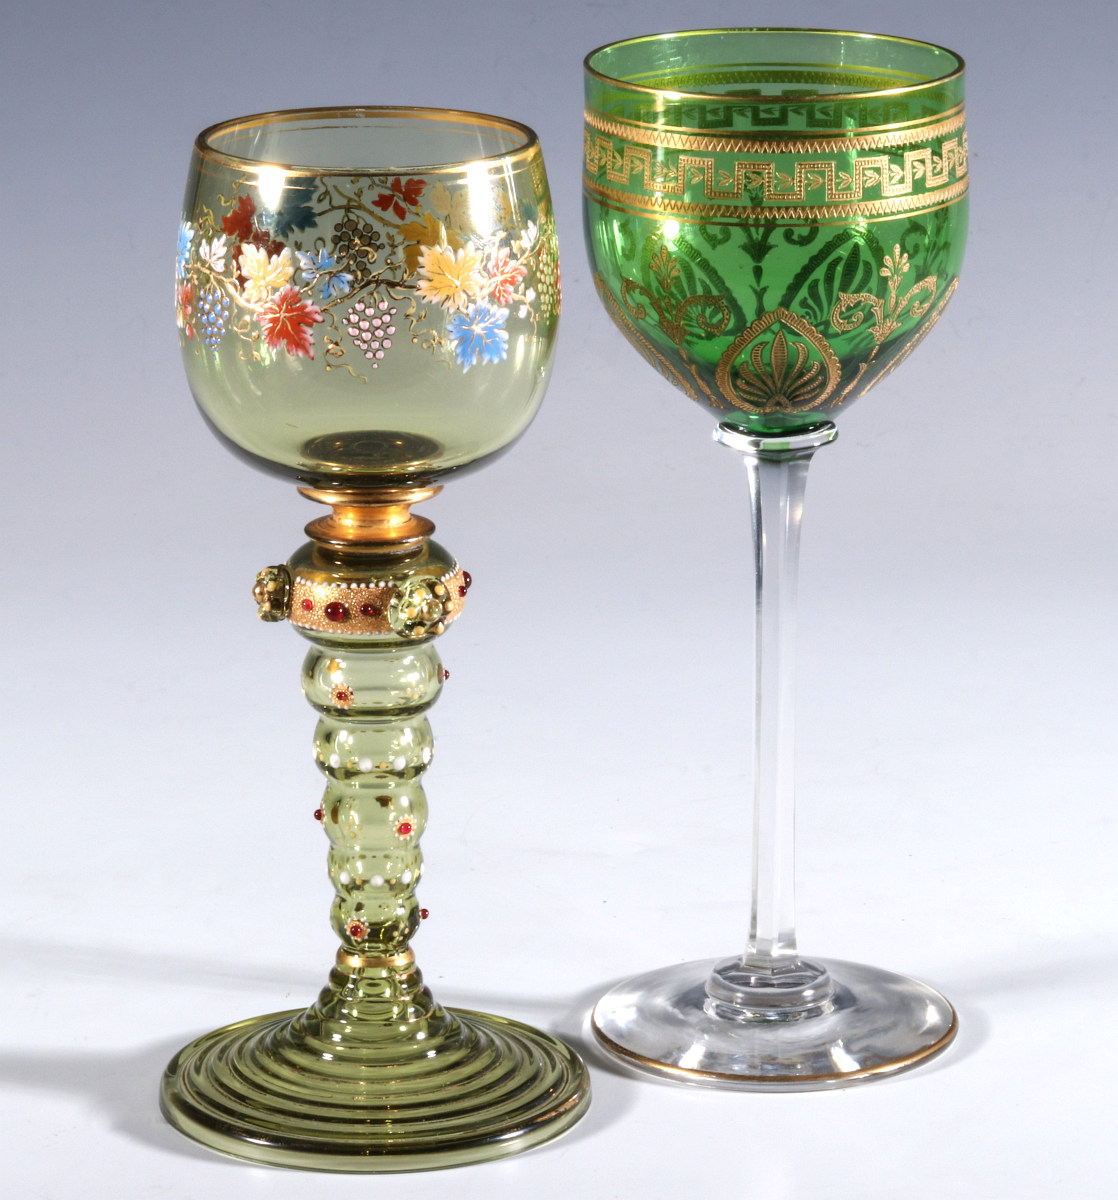 BOHEMIAN AND FRENCH(?) ART GLASS WINE GOBLETS